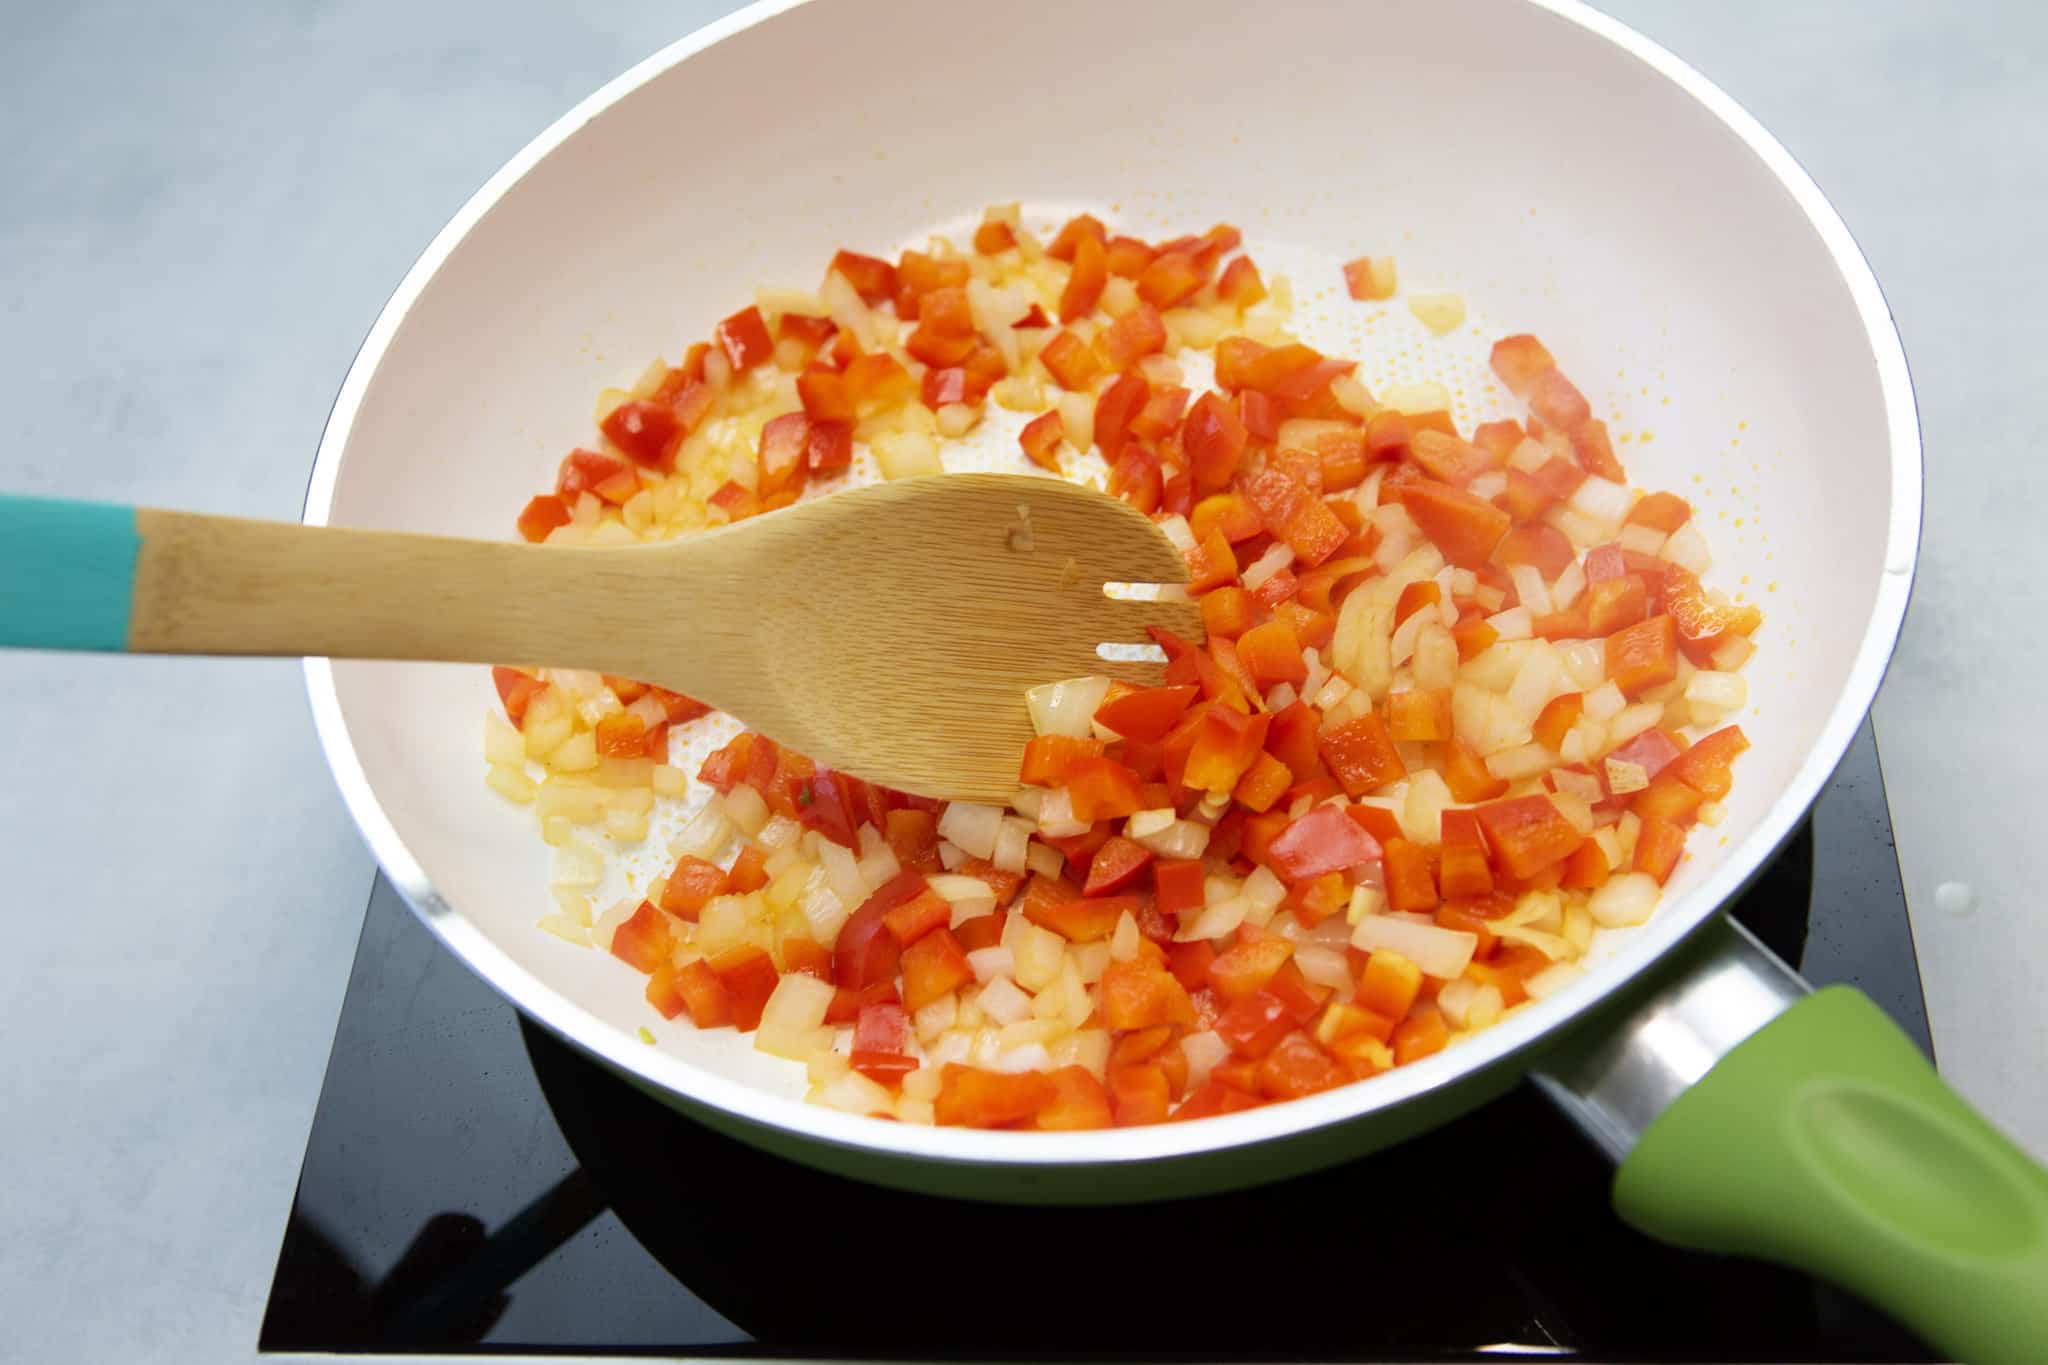 Onions and peppers sauteed in a pan